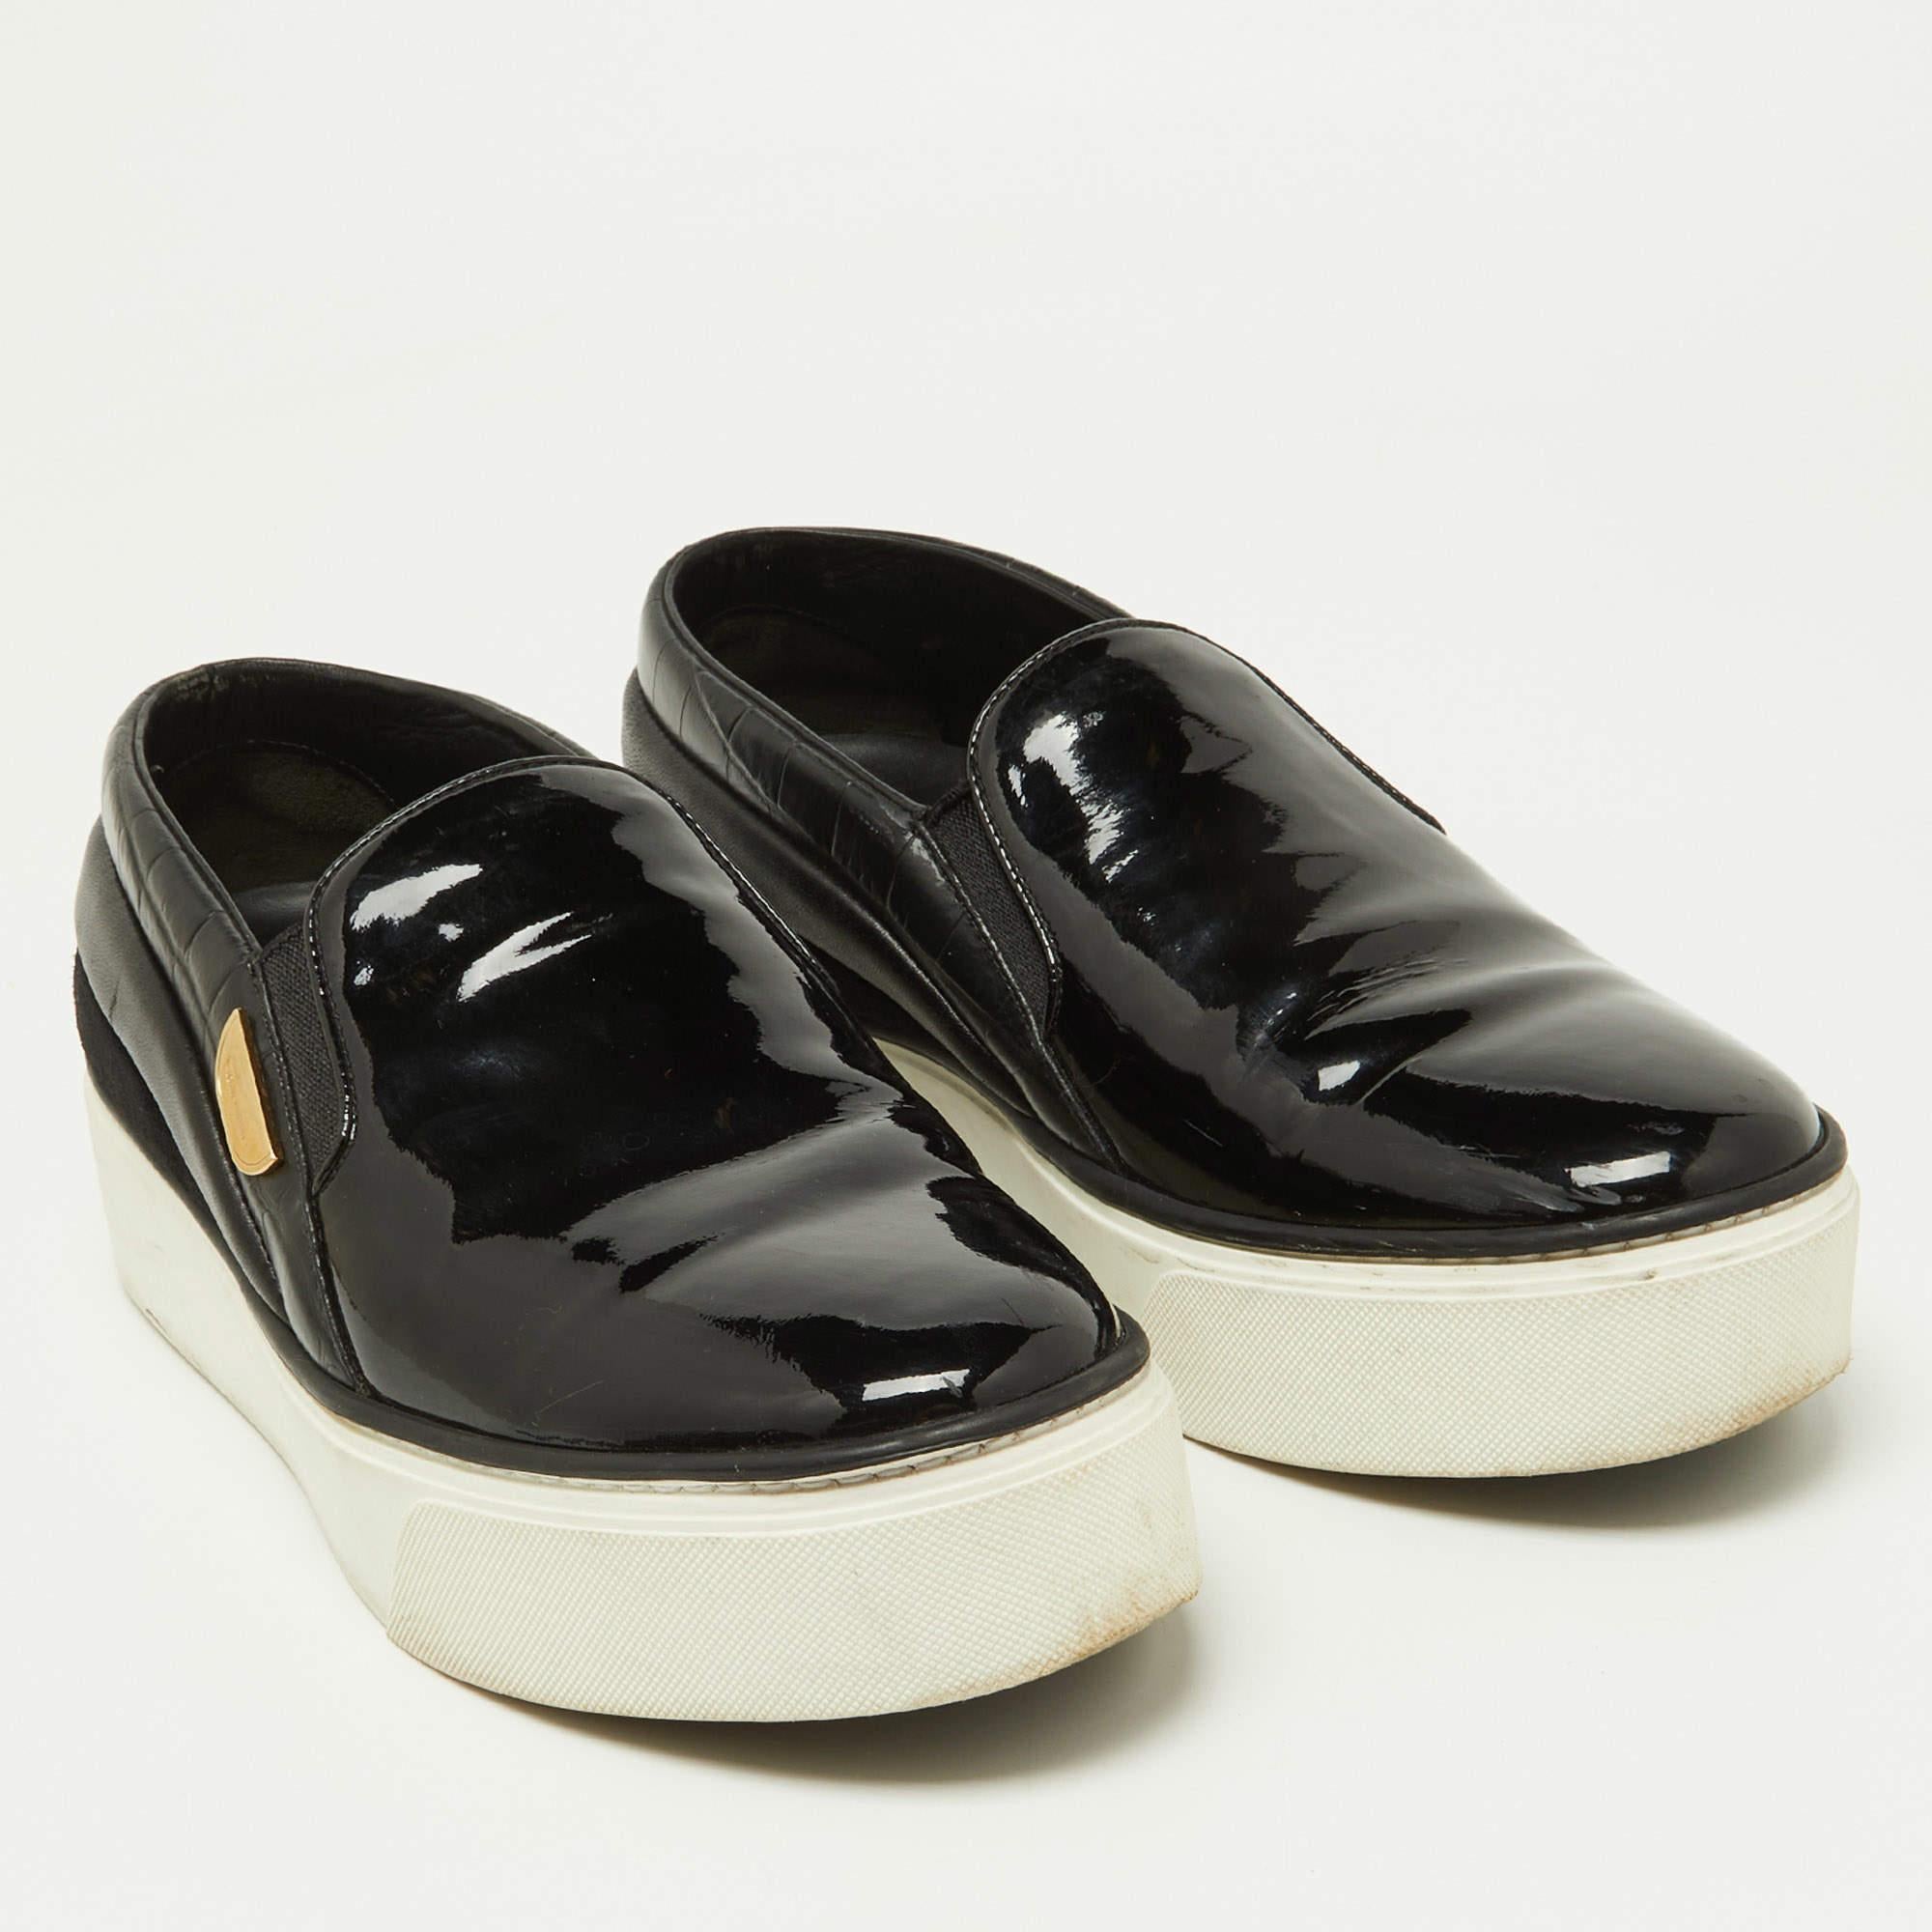 Louis Vuitton Black Patent and Leather Catwalk Sneakers Size 38.5 In Good Condition For Sale In Dubai, Al Qouz 2